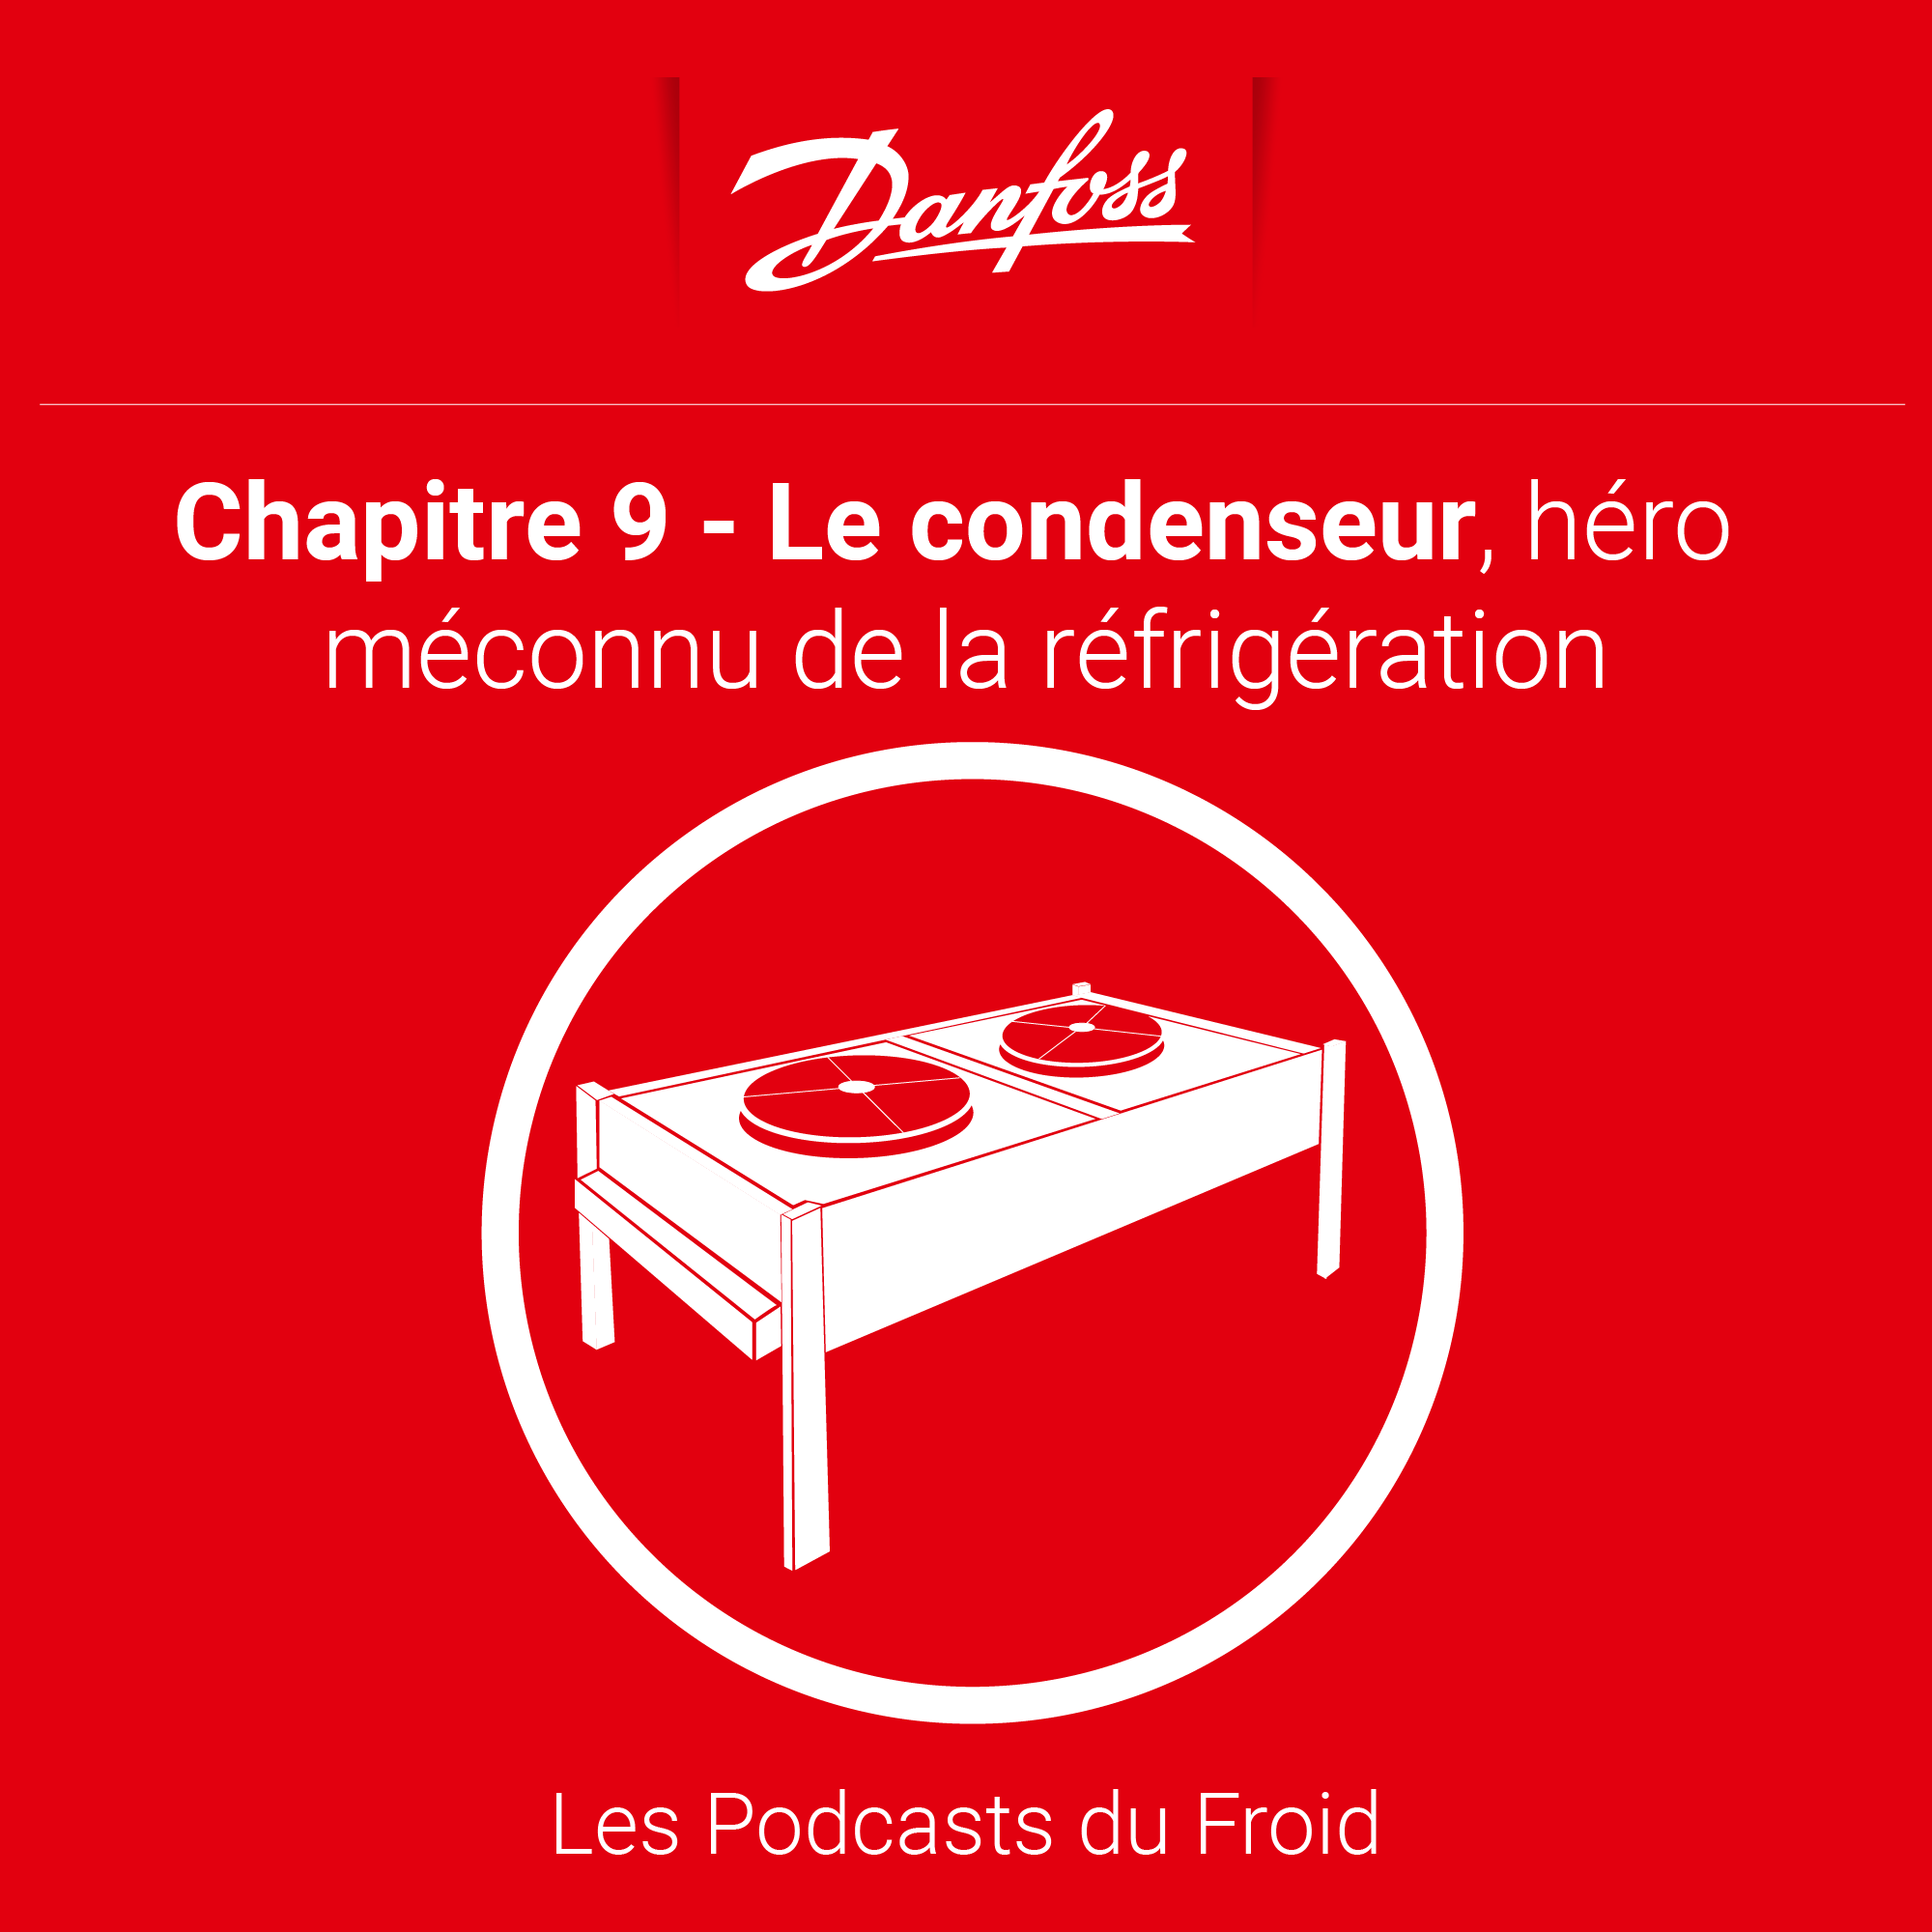 Artwork for podcast Les podcasts du Froid